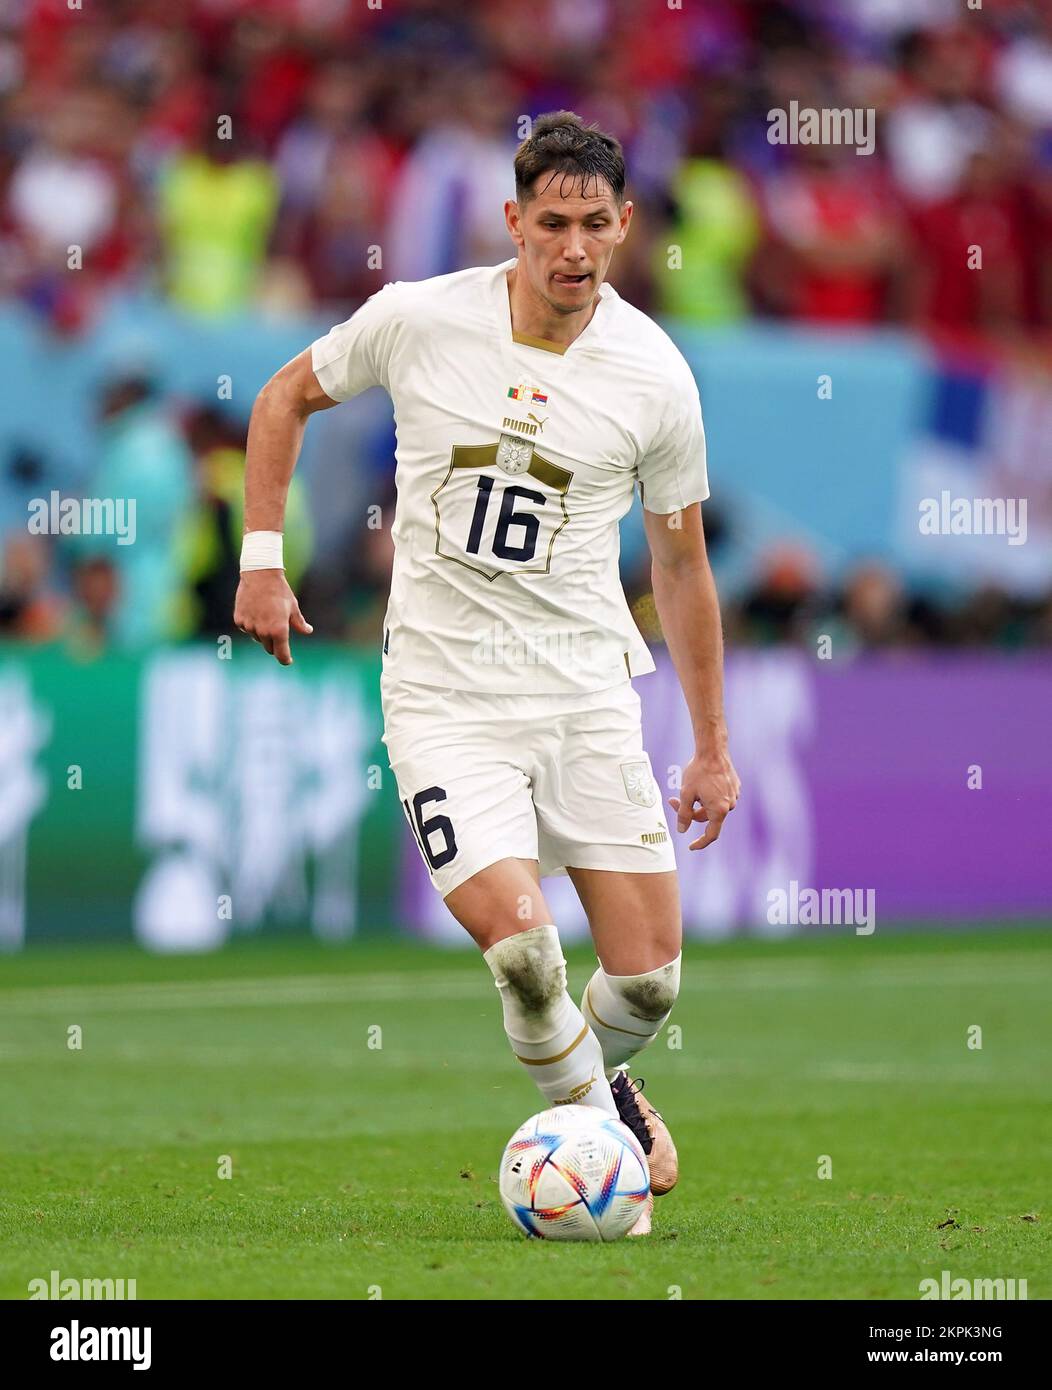 Serbia’s Sasa Lukic during the FIFA World Cup Group G match at the Al Janoub Stadium in Al Wakrah, Qatar. Picture date: Monday November 28, 2022. Stock Photo